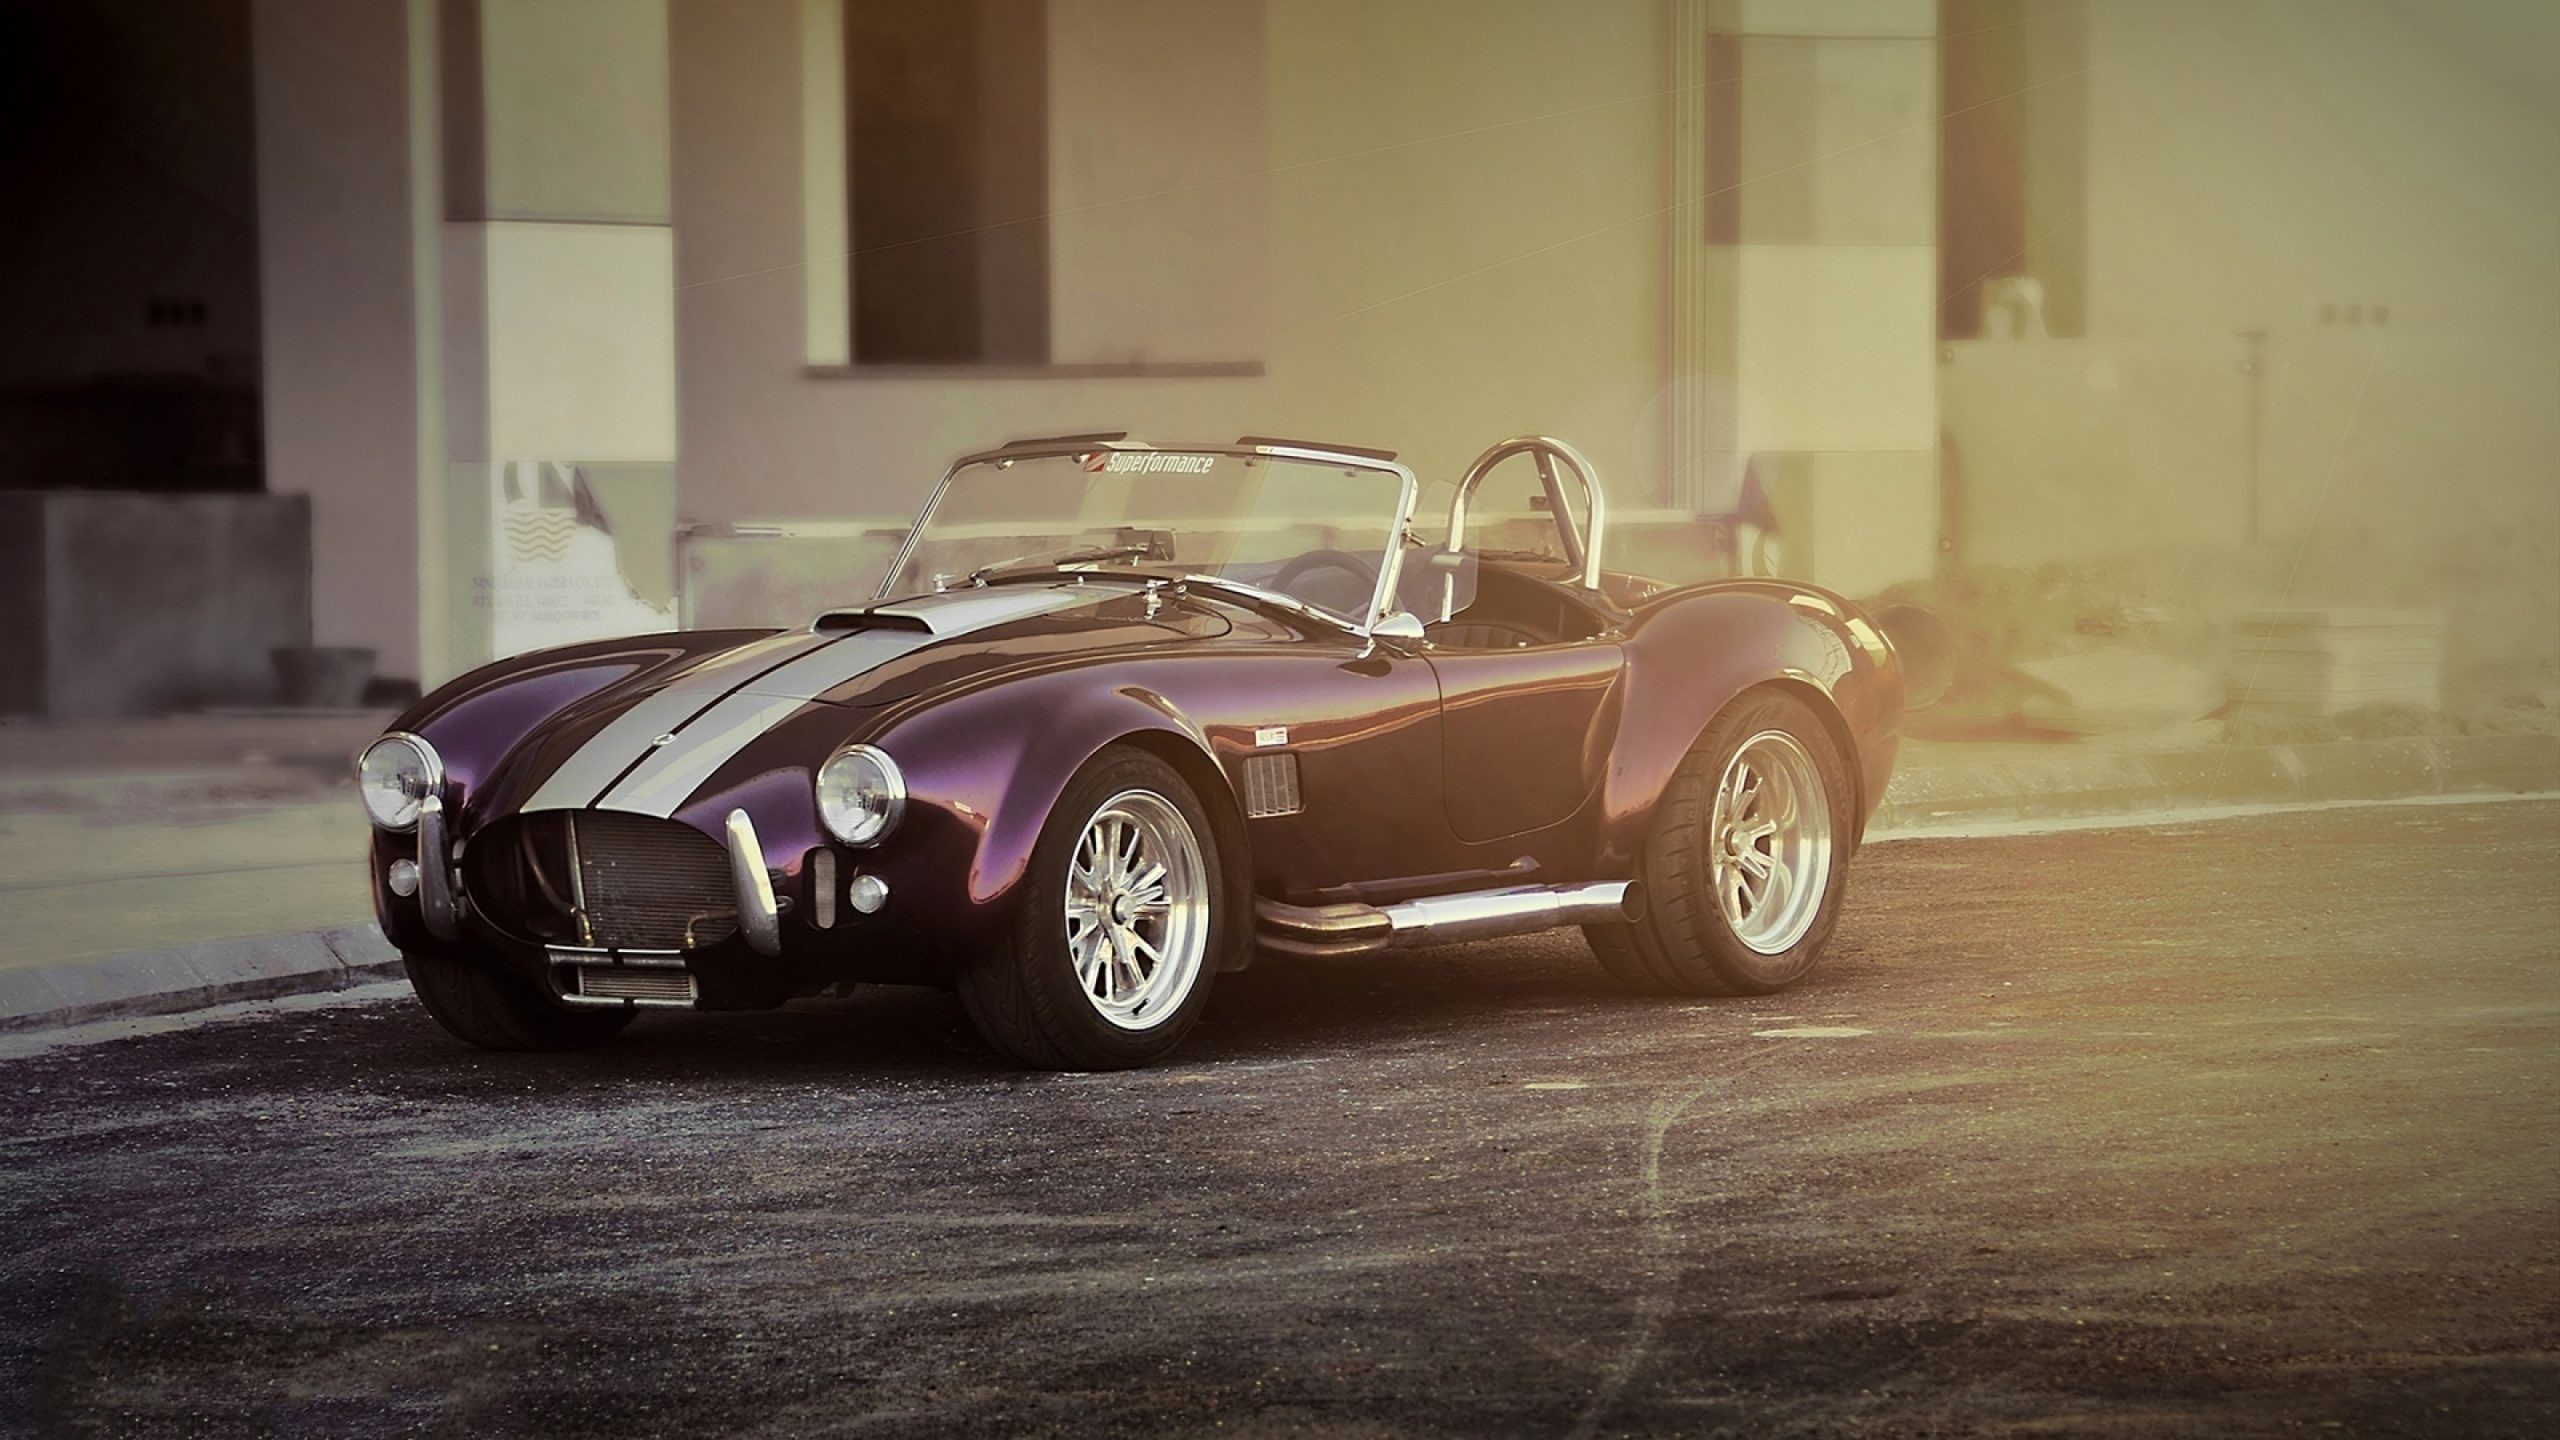 Download Shelby Cobra 427 wallpapers for mobile phone free Shelby Cobra  427 HD pictures